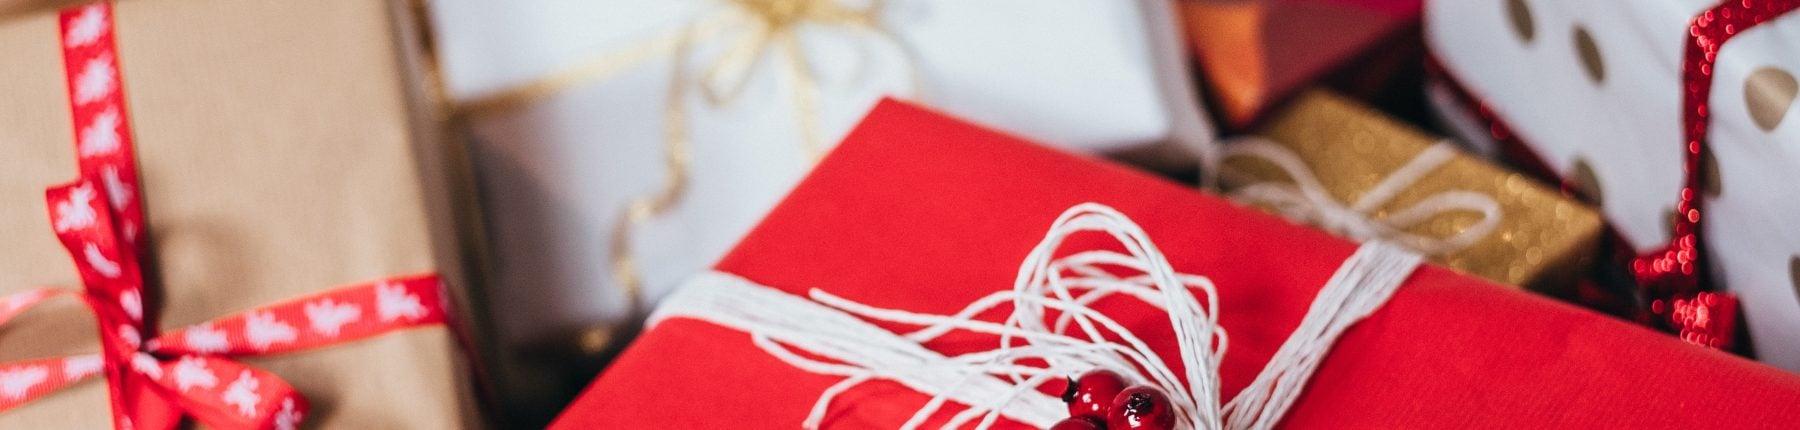 Beautifully wrapped white and red gift boxes with delicate string bows and adornments